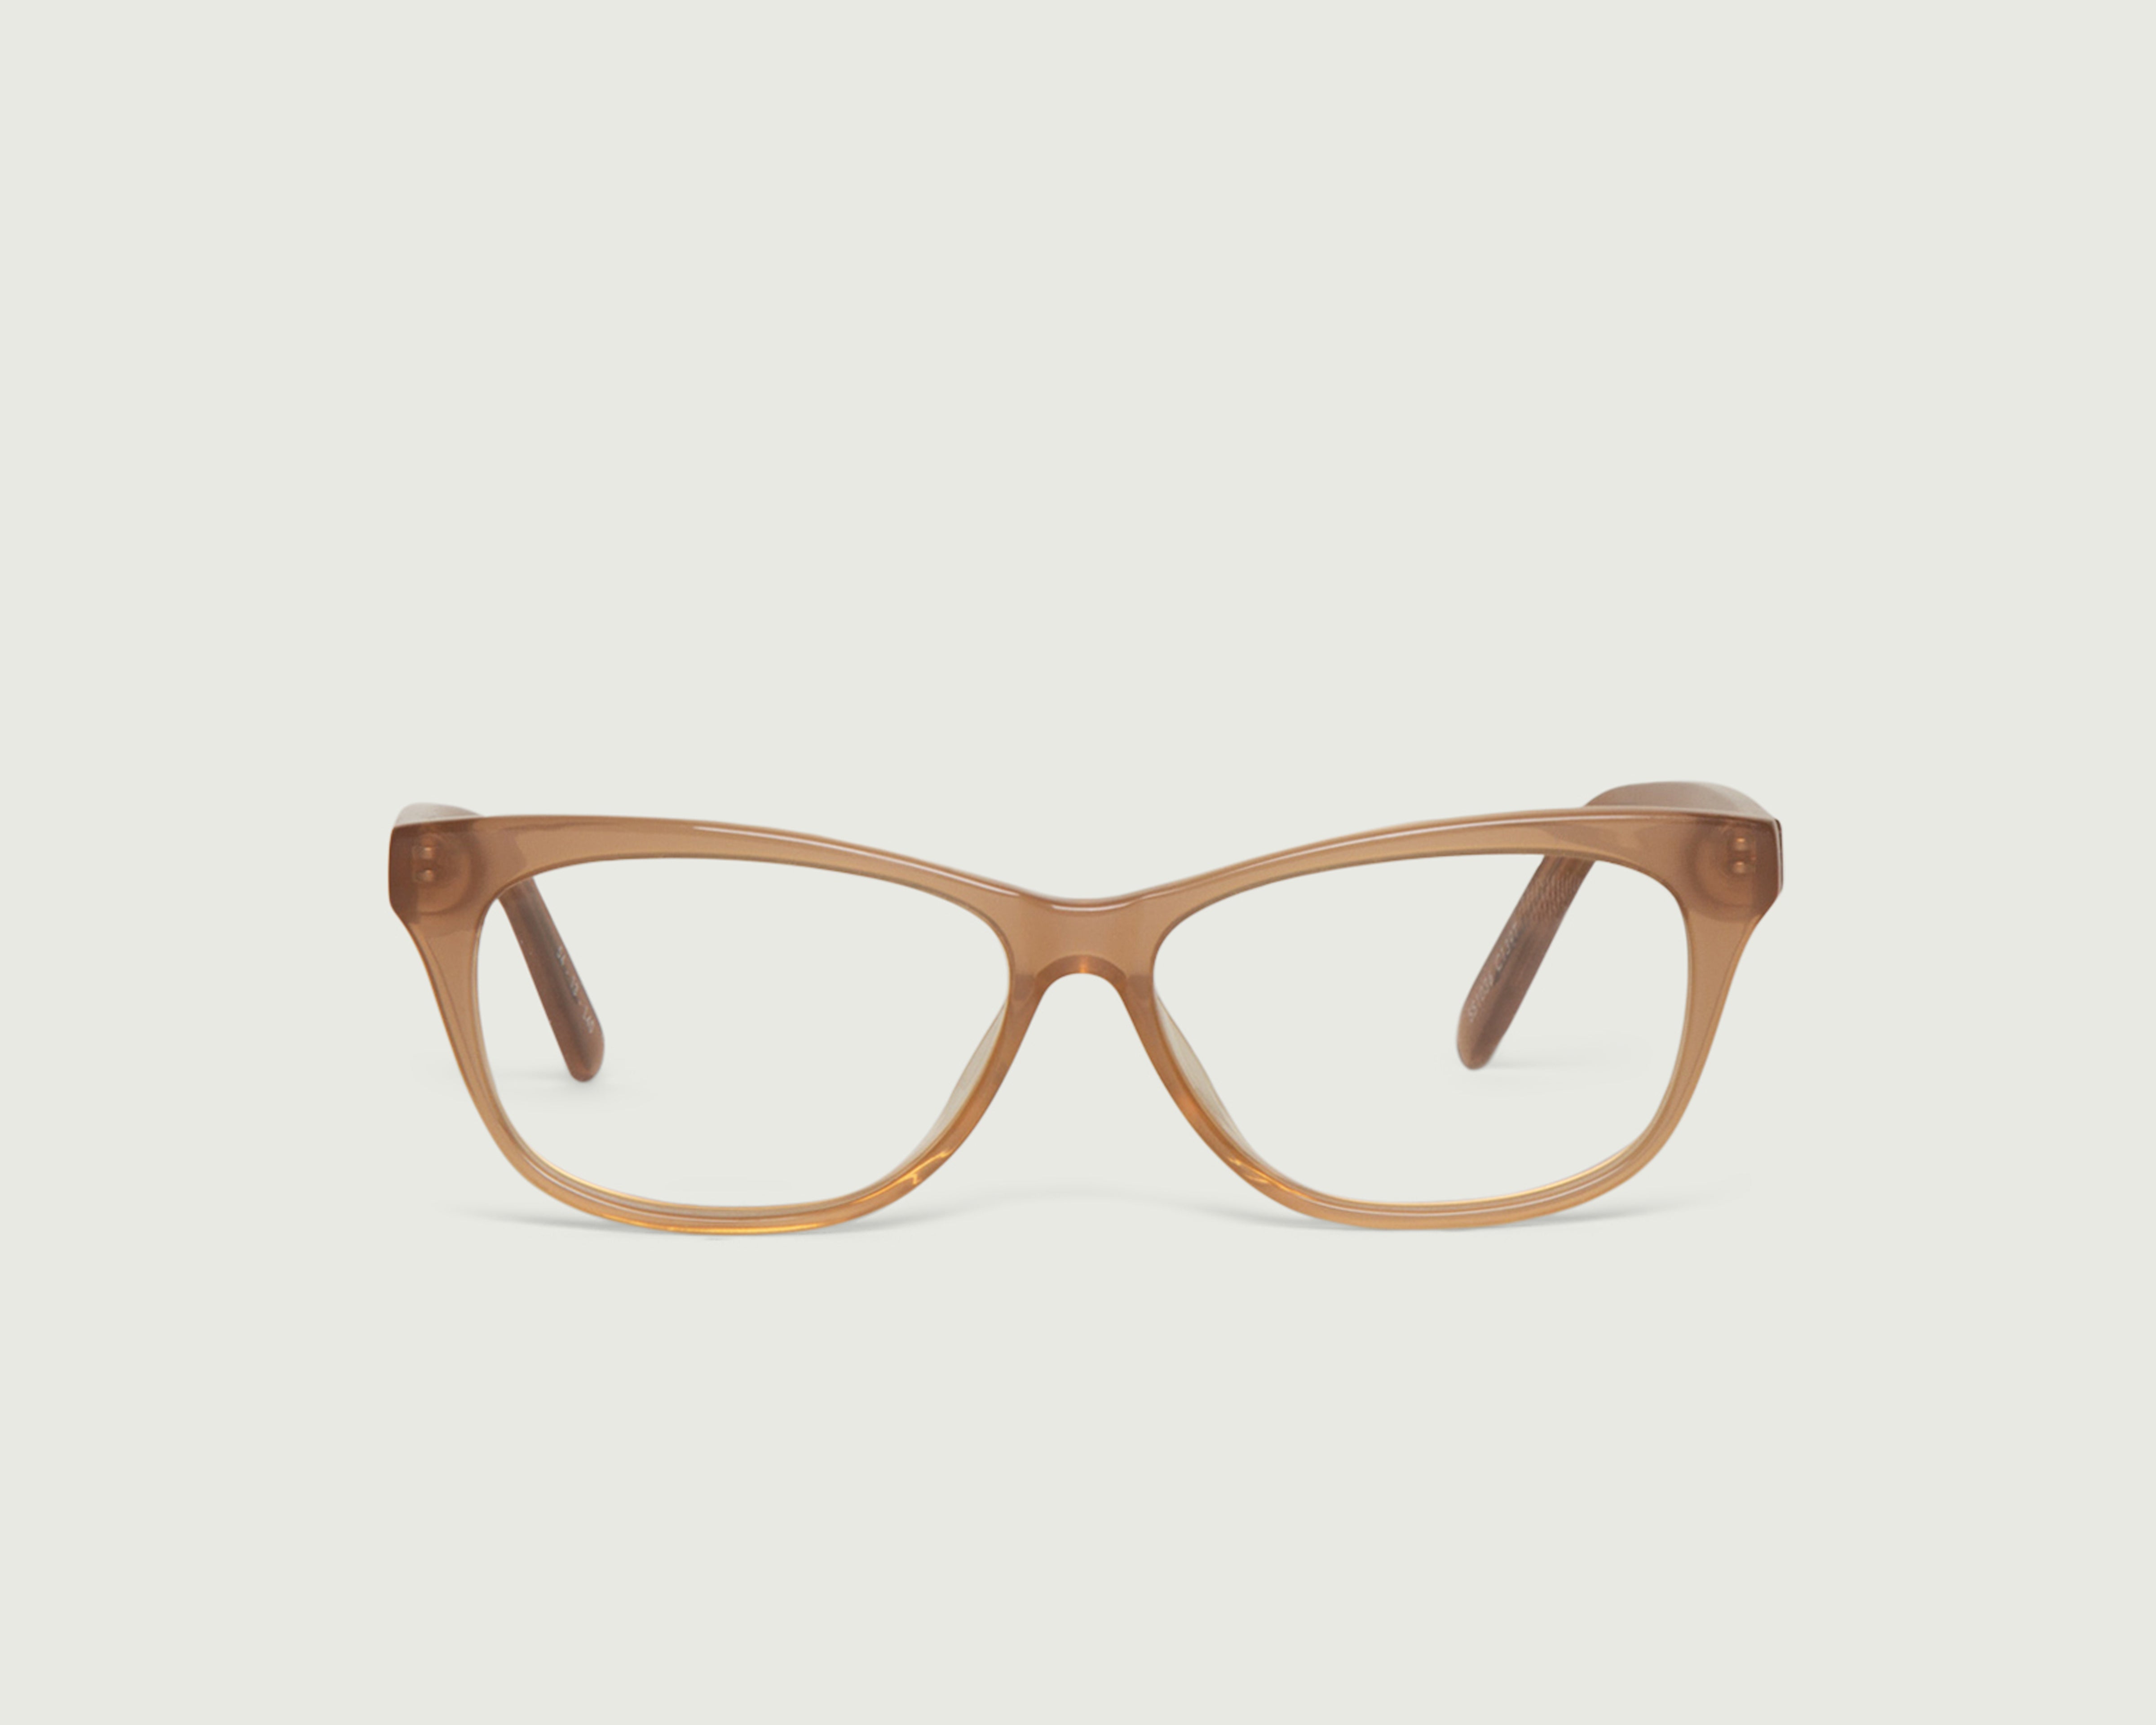 Syrup::Lucille Eyeglasses cat eye nude acetate front